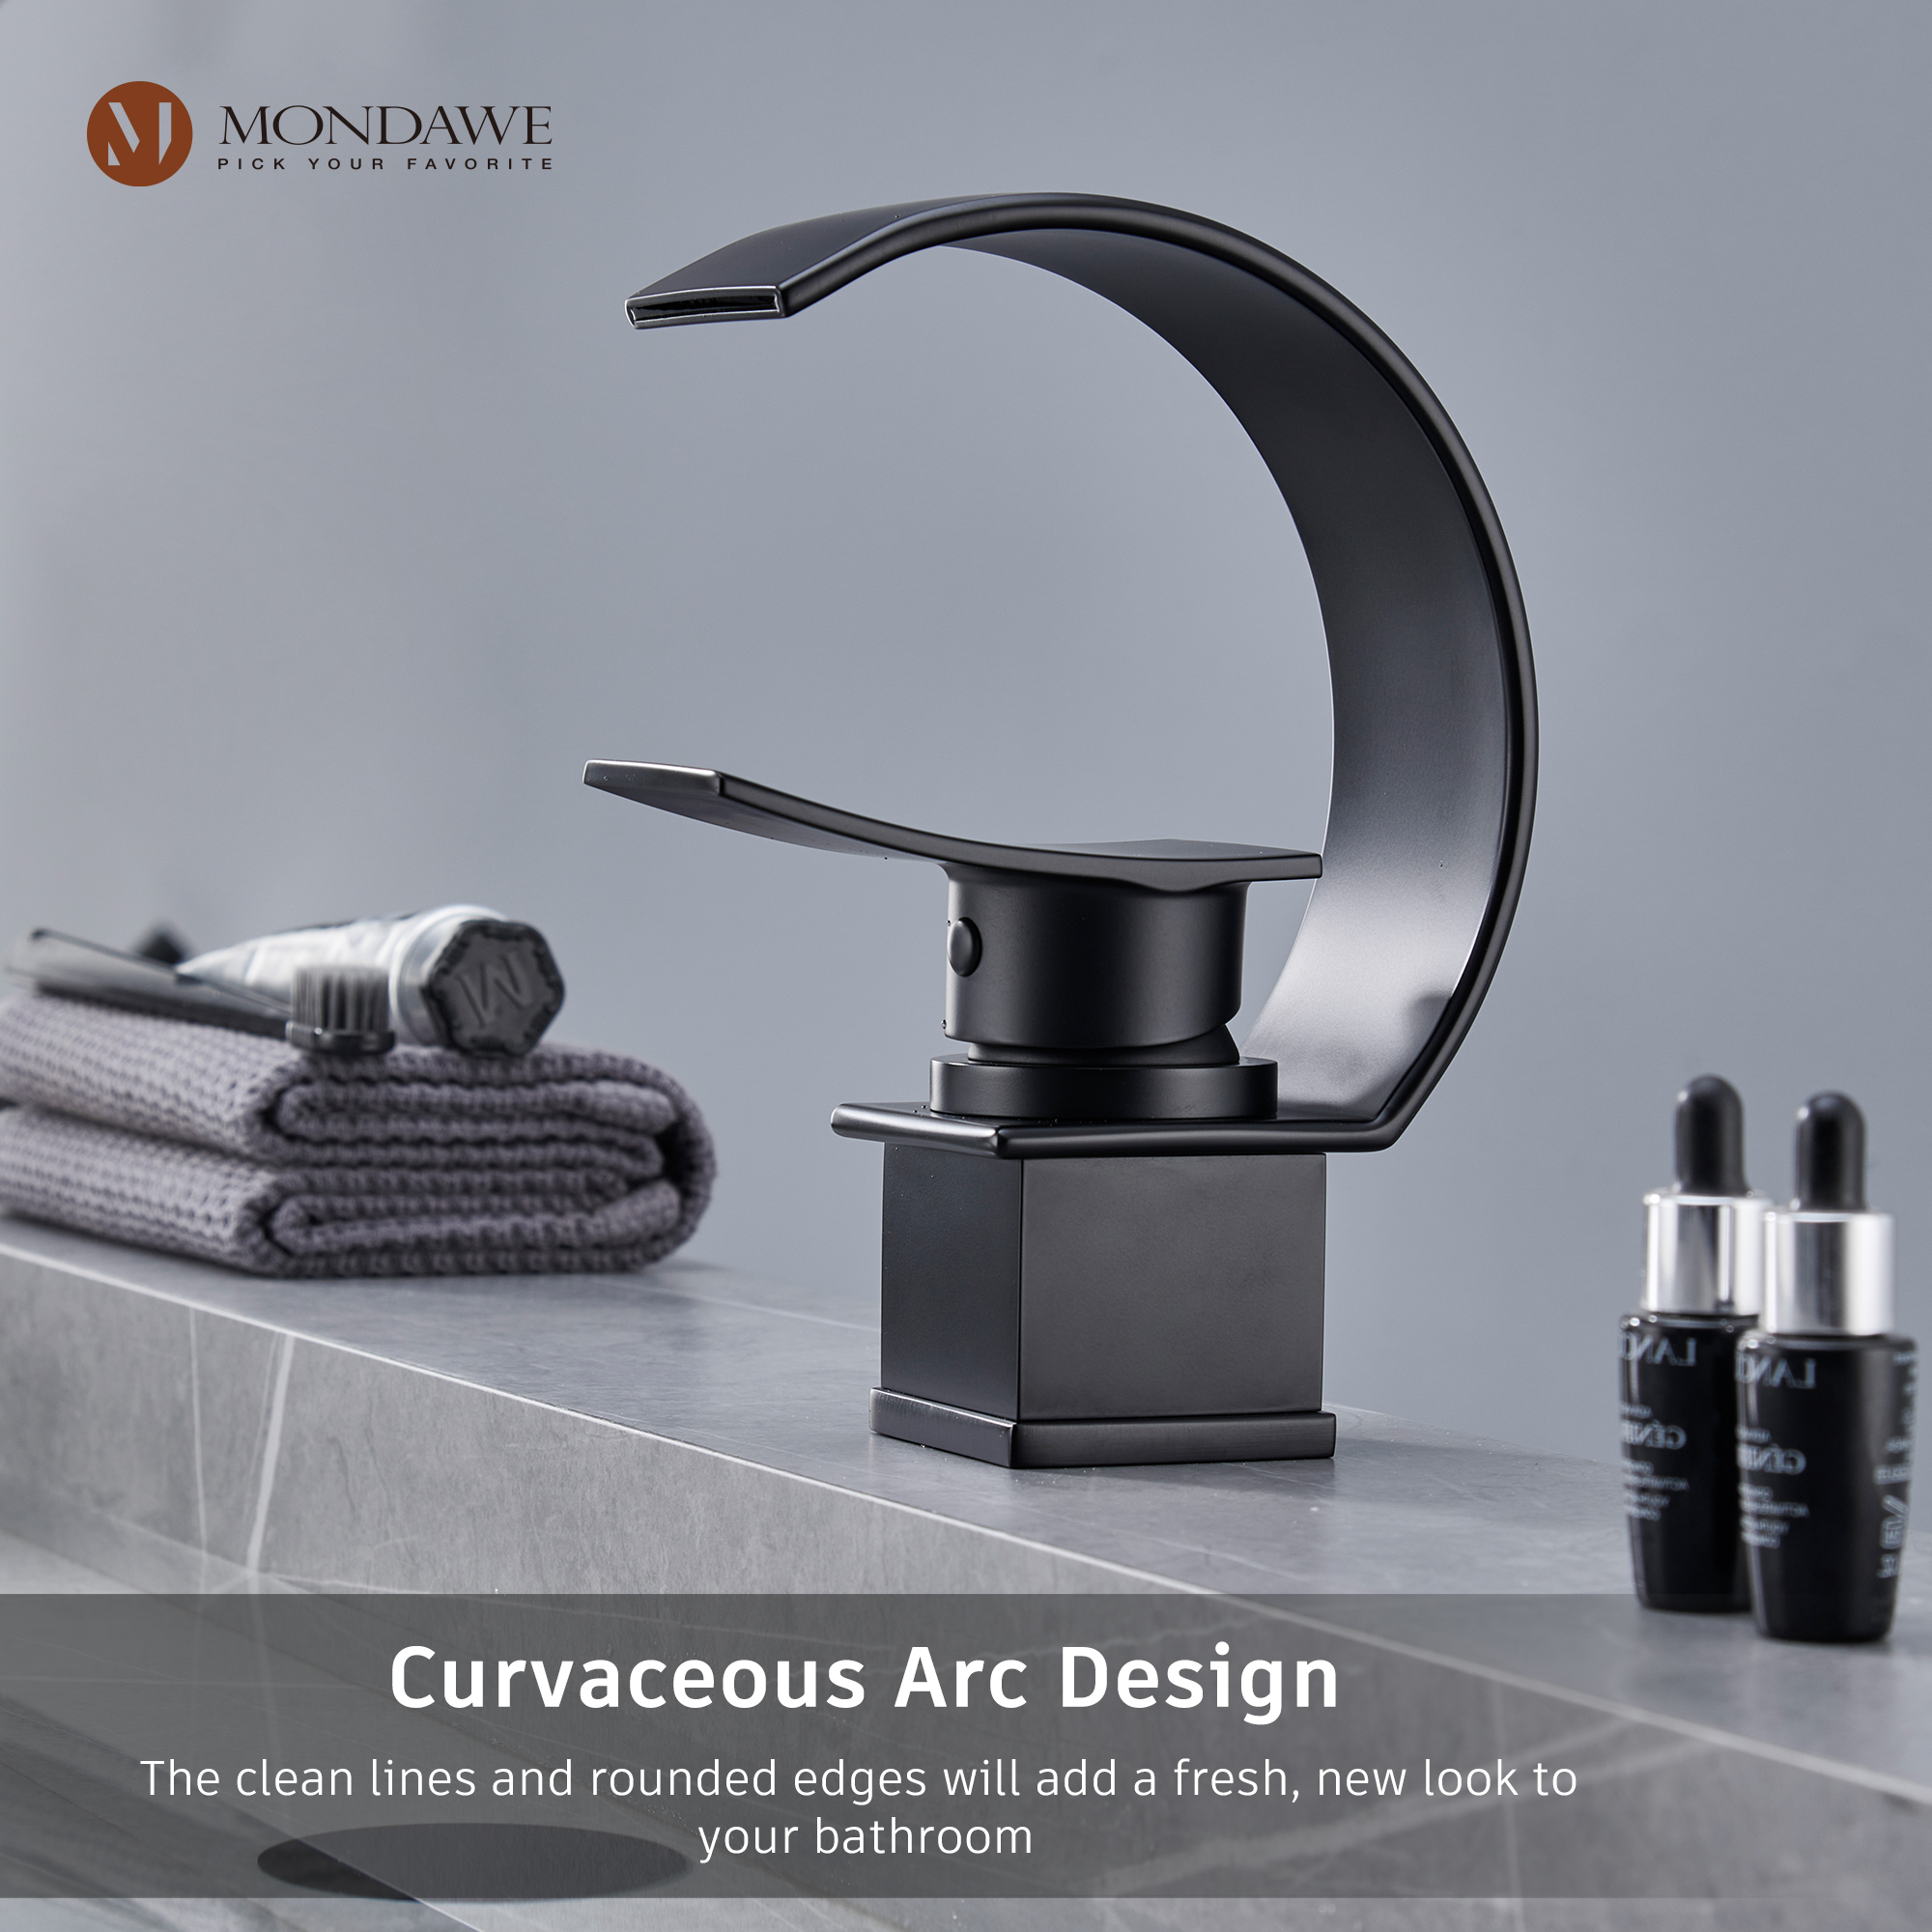 Mondawe 8 In Widespread Single-Lever Handle Arc Spout Single-Hole Bathroom Sink Faucet with Waterfall-Mondawe